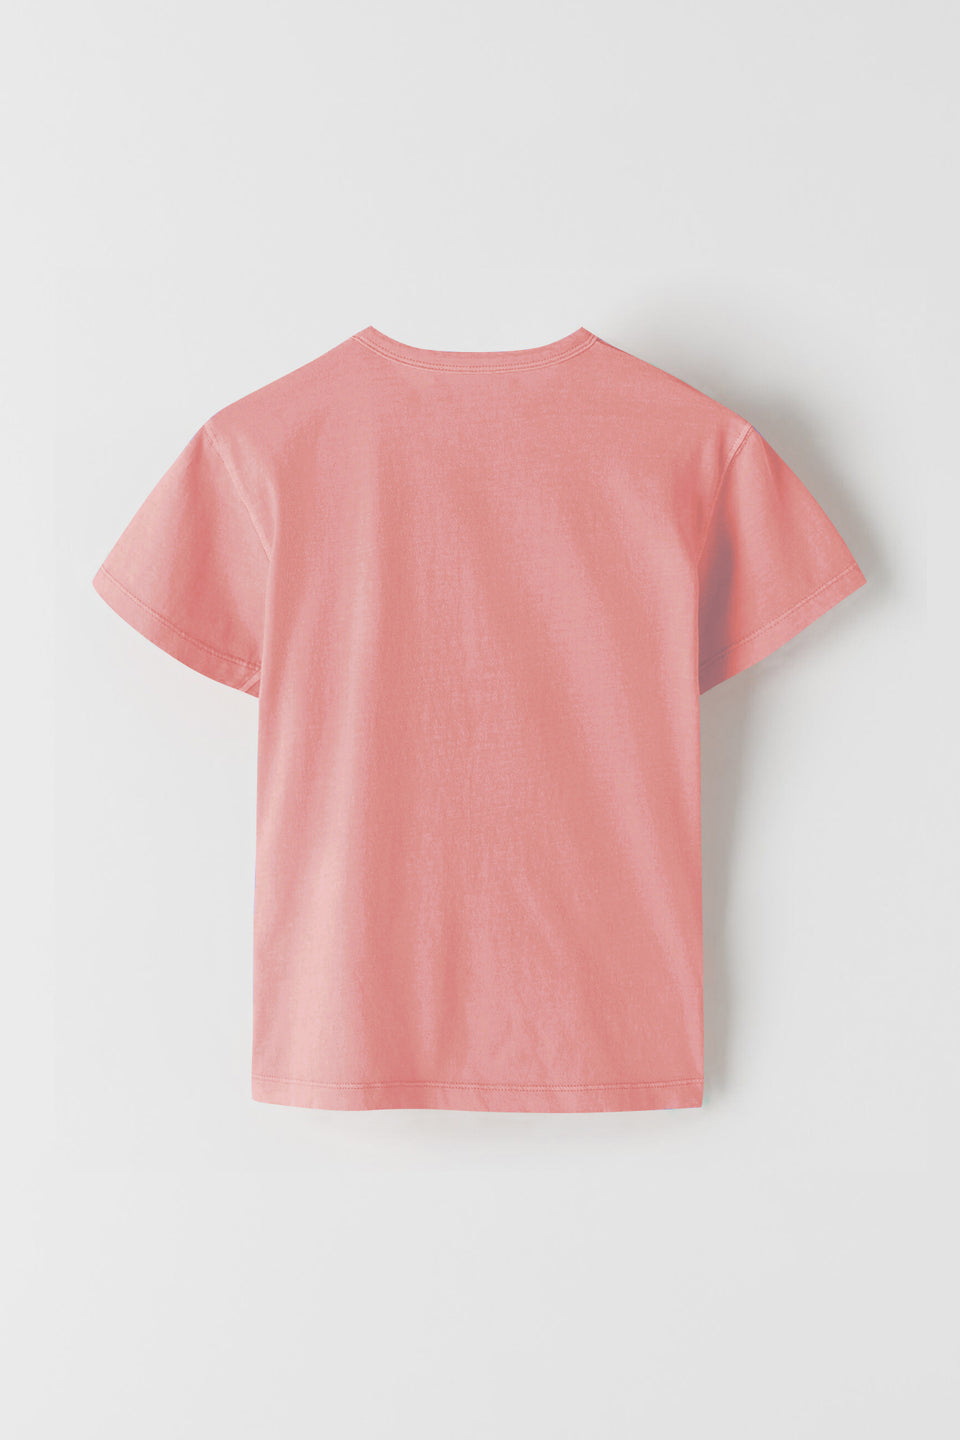 Kids Boys & Girls Pink Solid Pure Cotton Casual T-Shirt